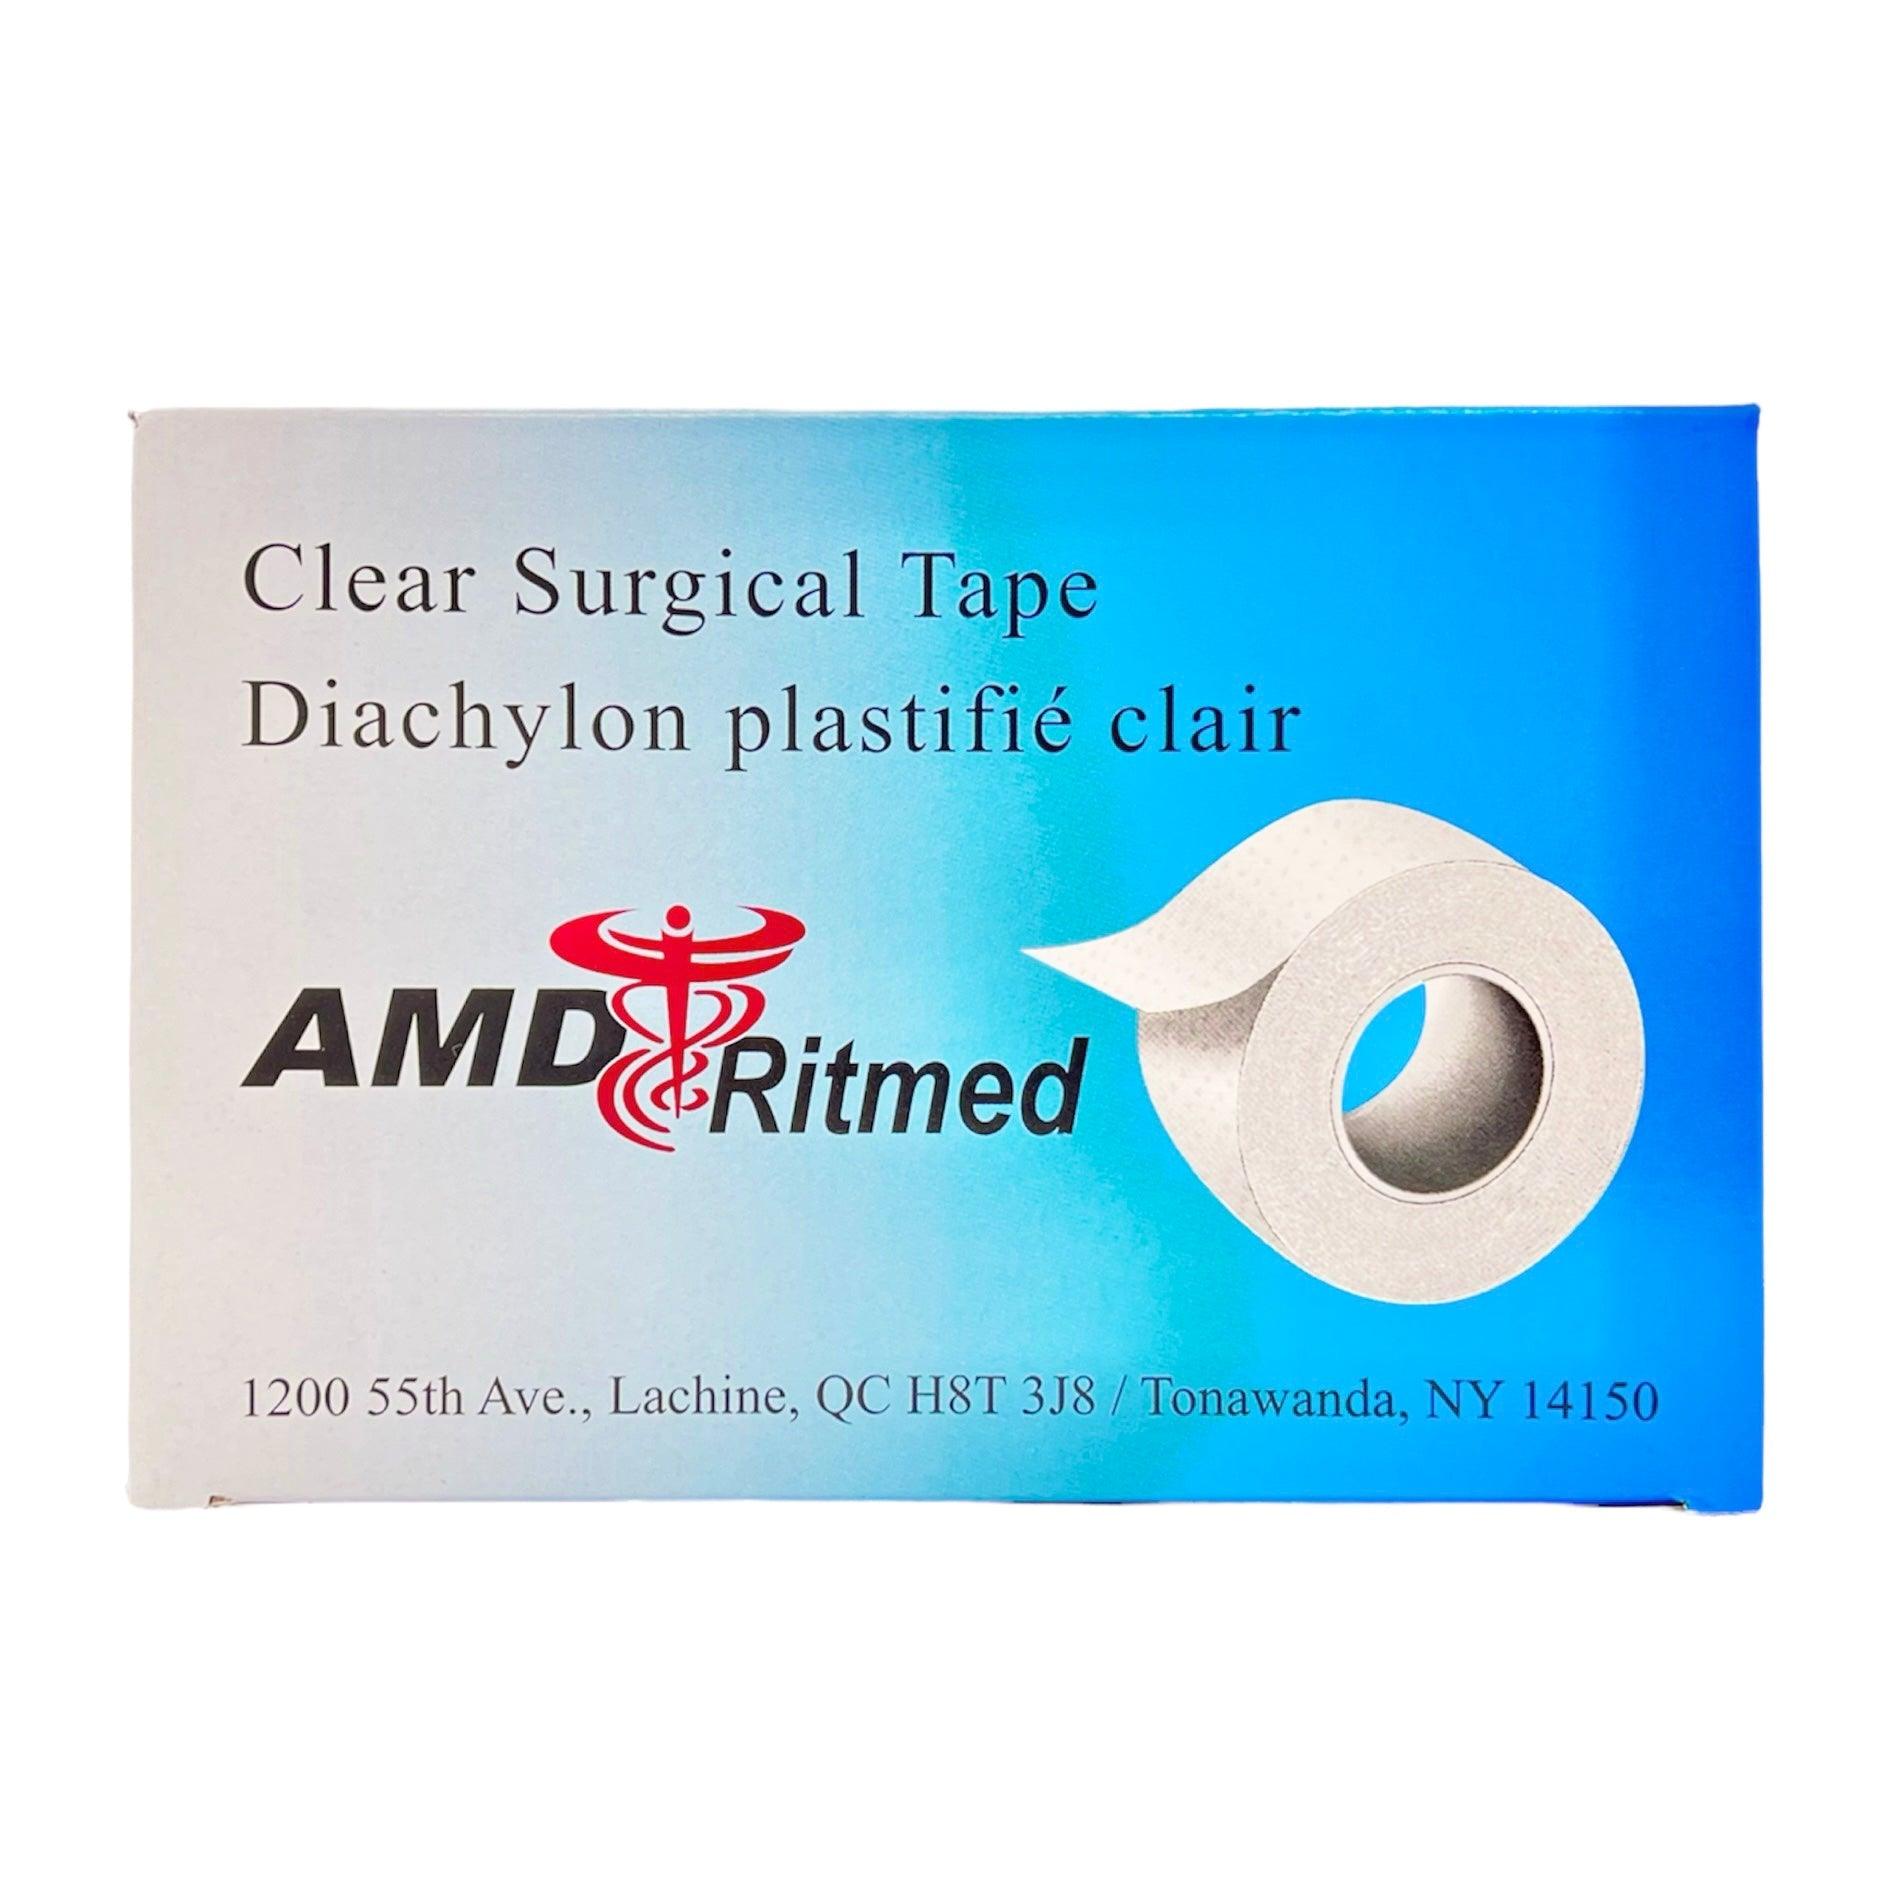 AMD Ritmed - Clear Surgical Tape (1" x 10yds)